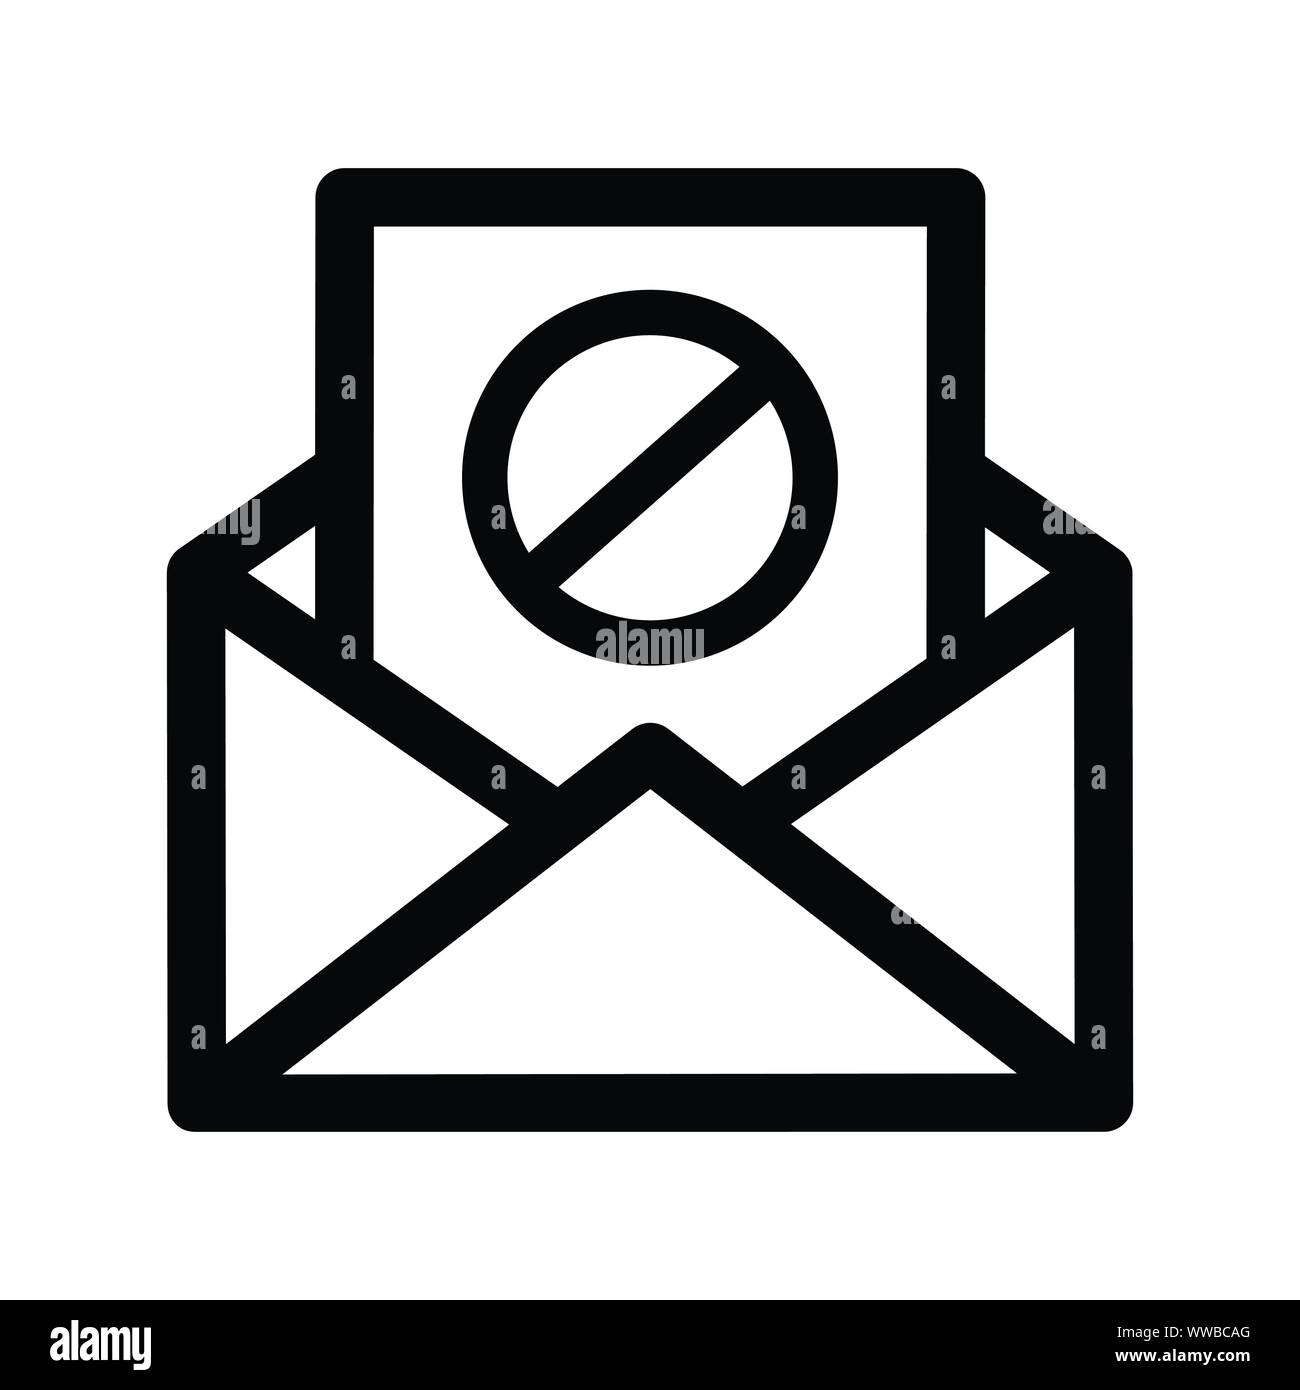 Beautiful design and fully editable Email Spamming Icon, Spam mailing, wrong e-mail address for commercial, print media, web or any type of design pro Stock Vector